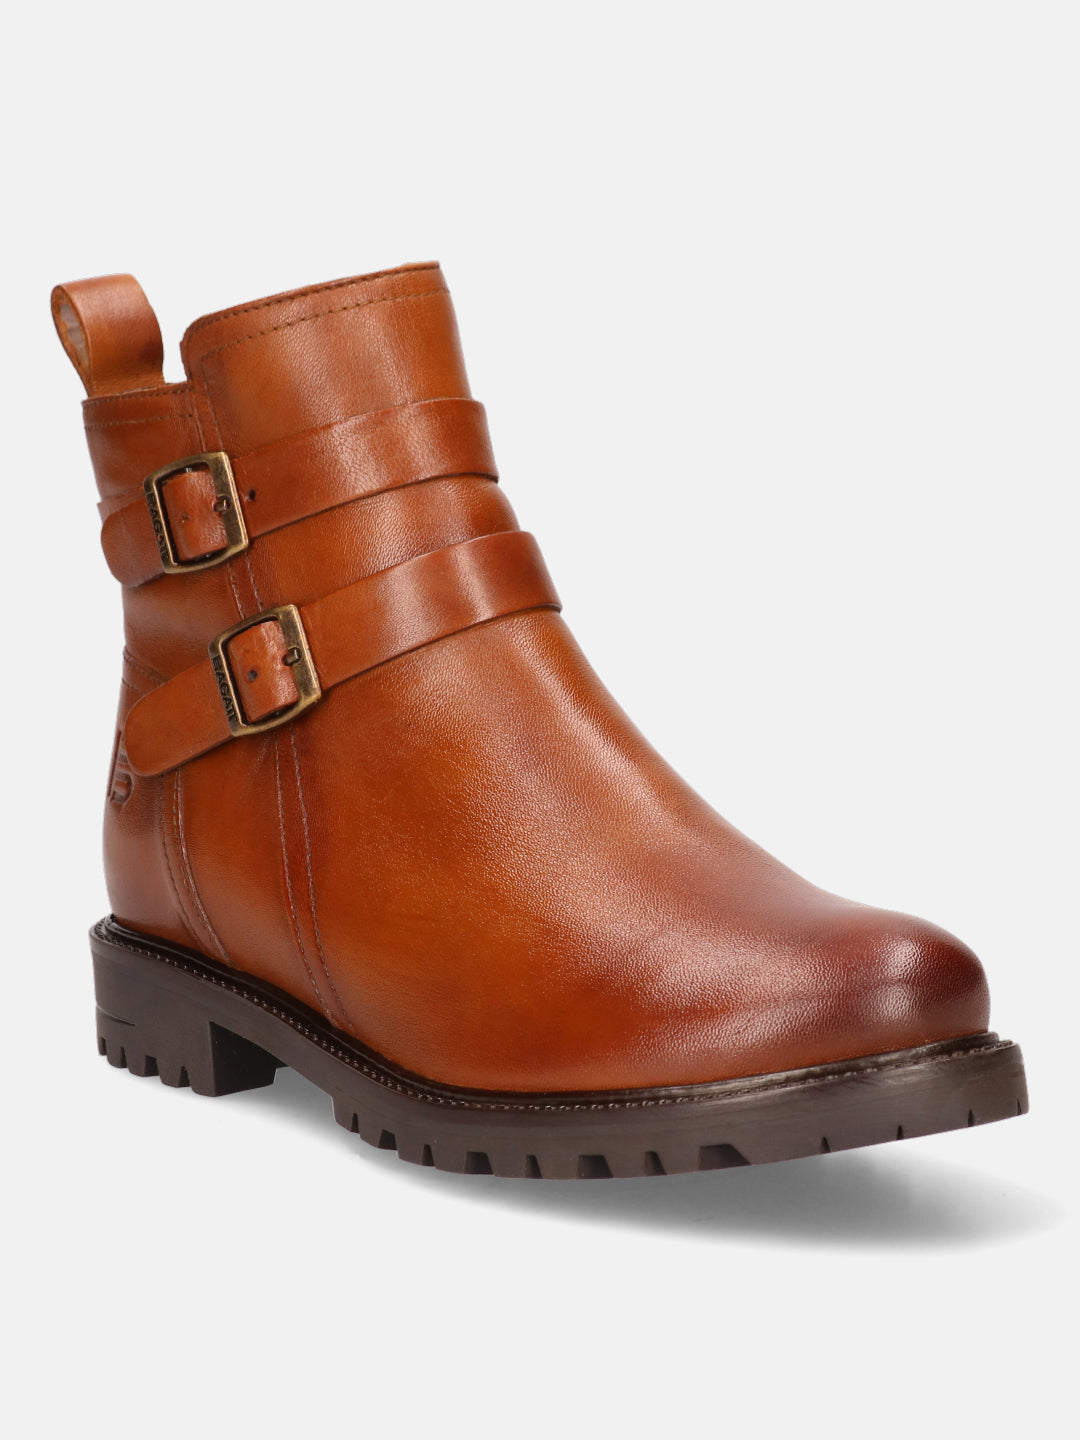 Ronja Revo Cognac Leather Ankle Boots